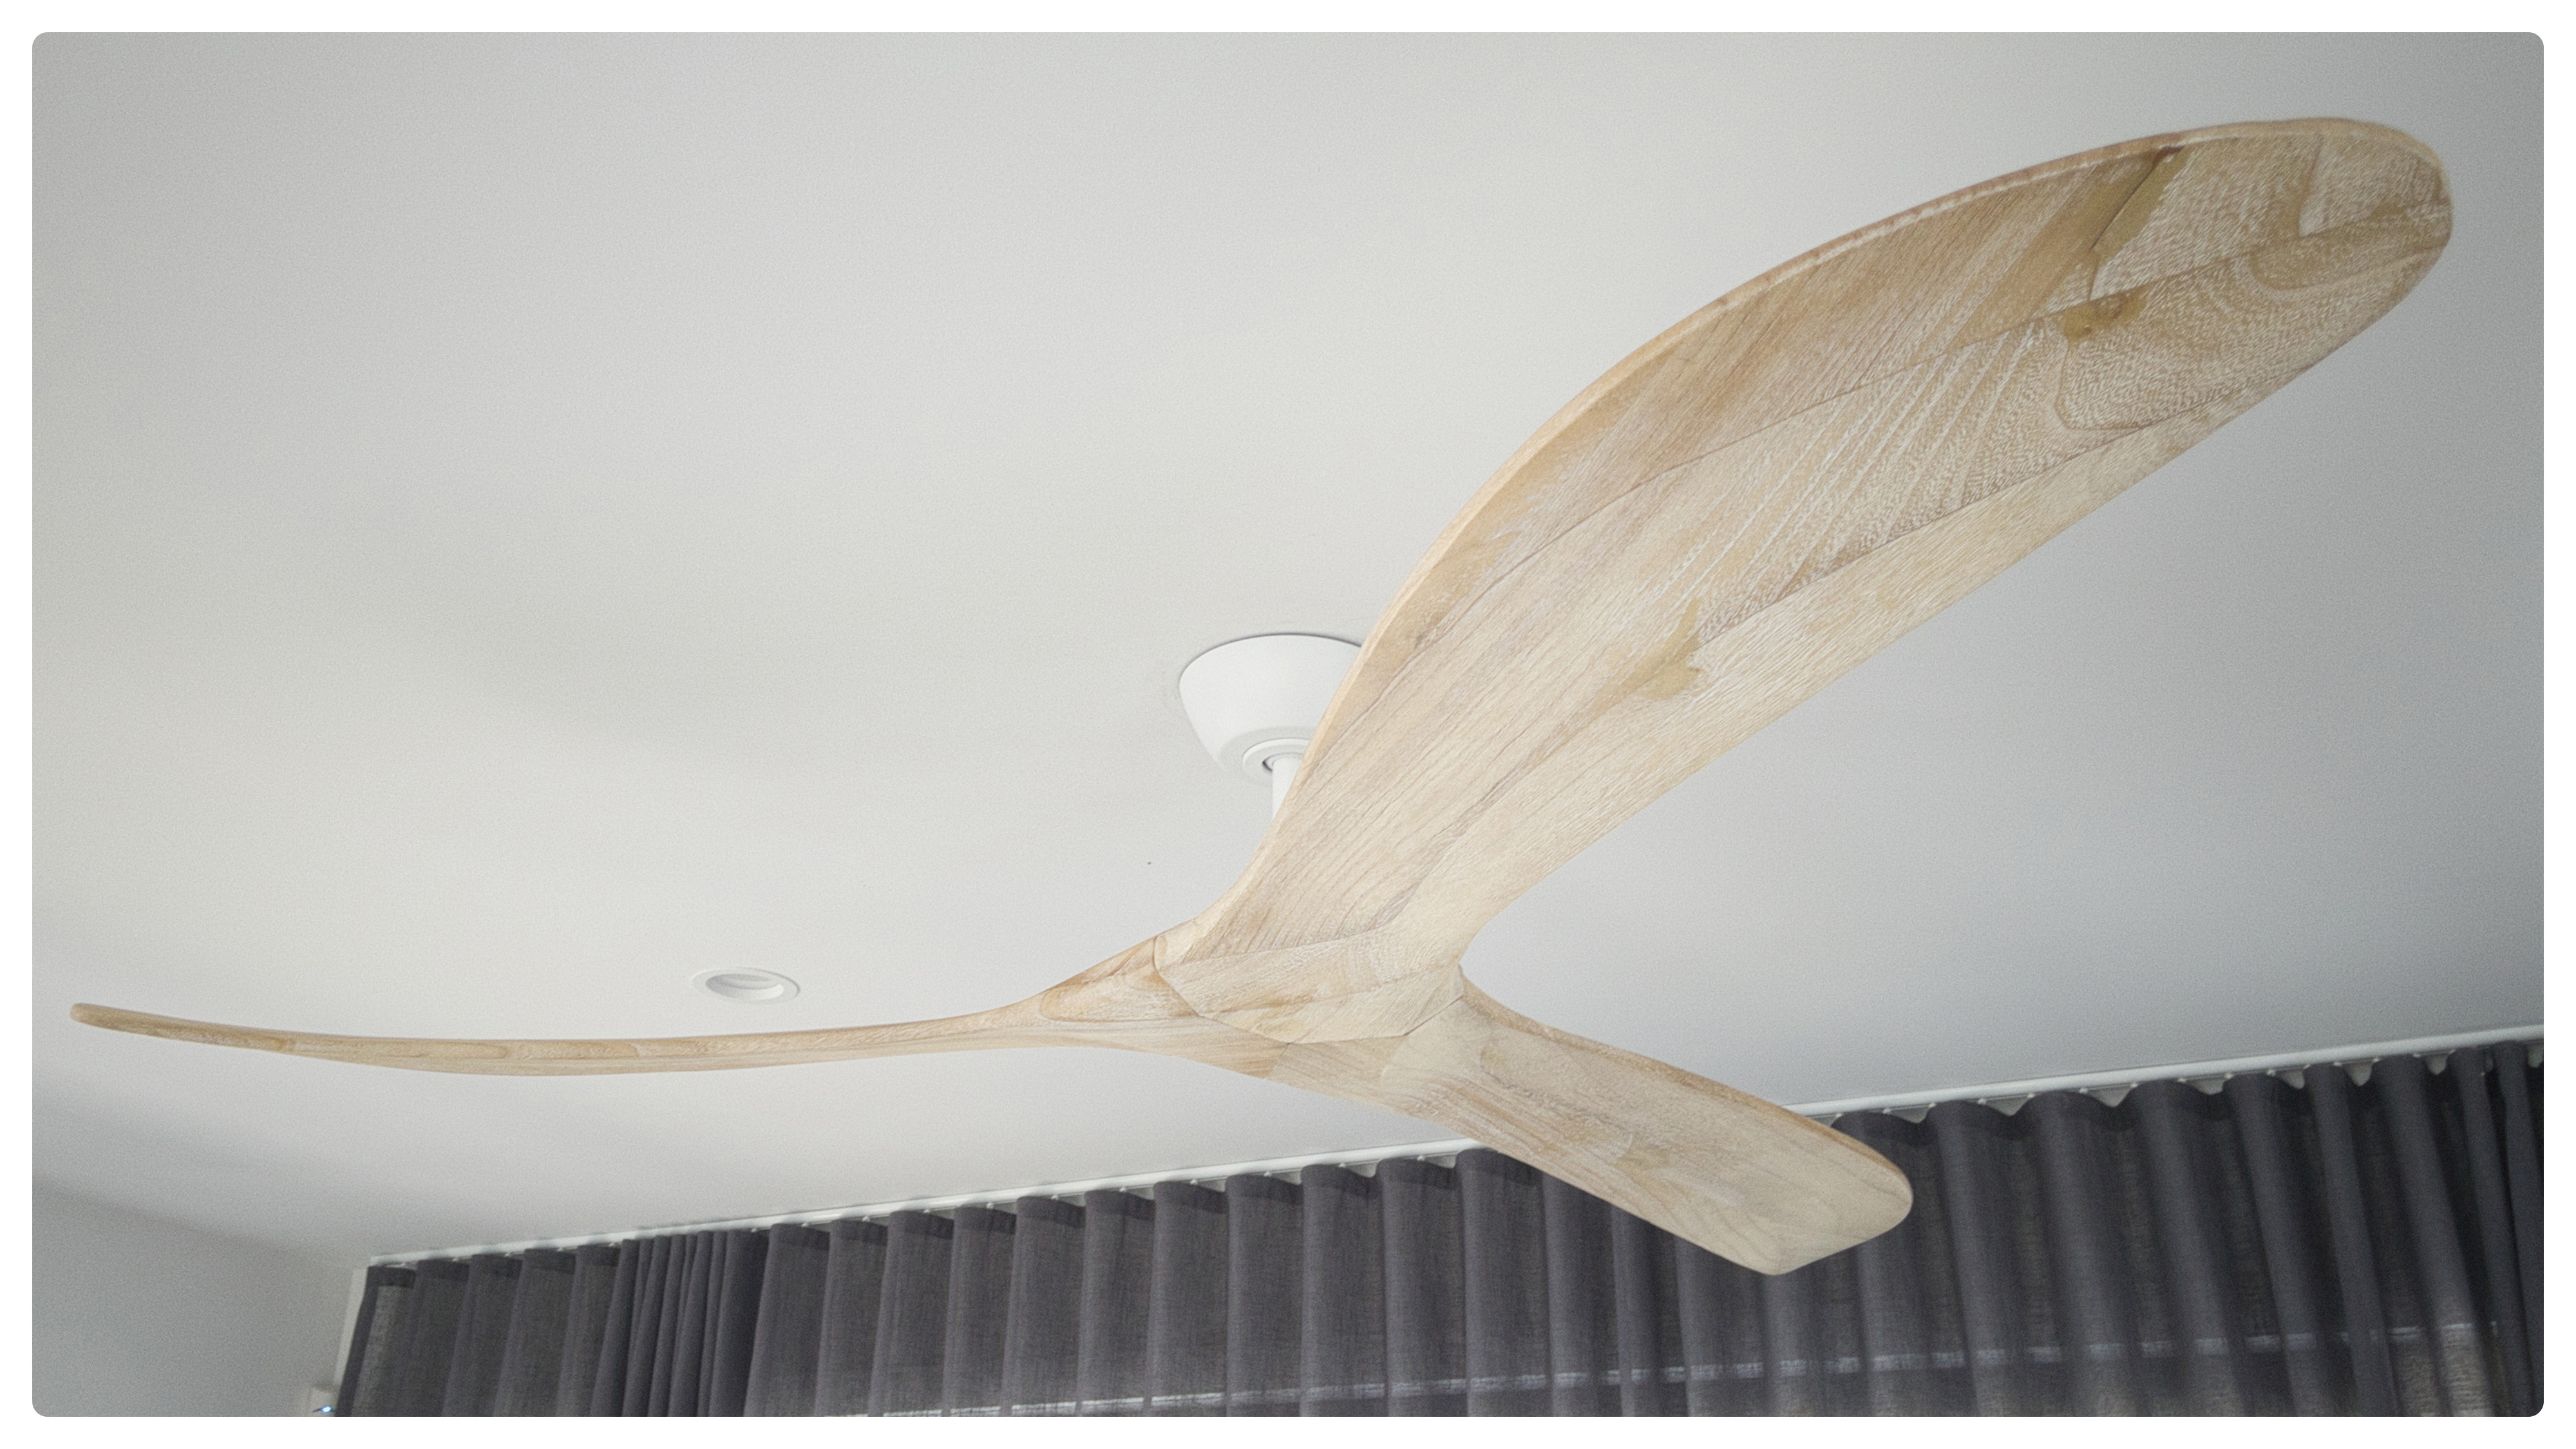 72" Timbr DC Ceiling Fan in Matte White with Weathered Oak blades